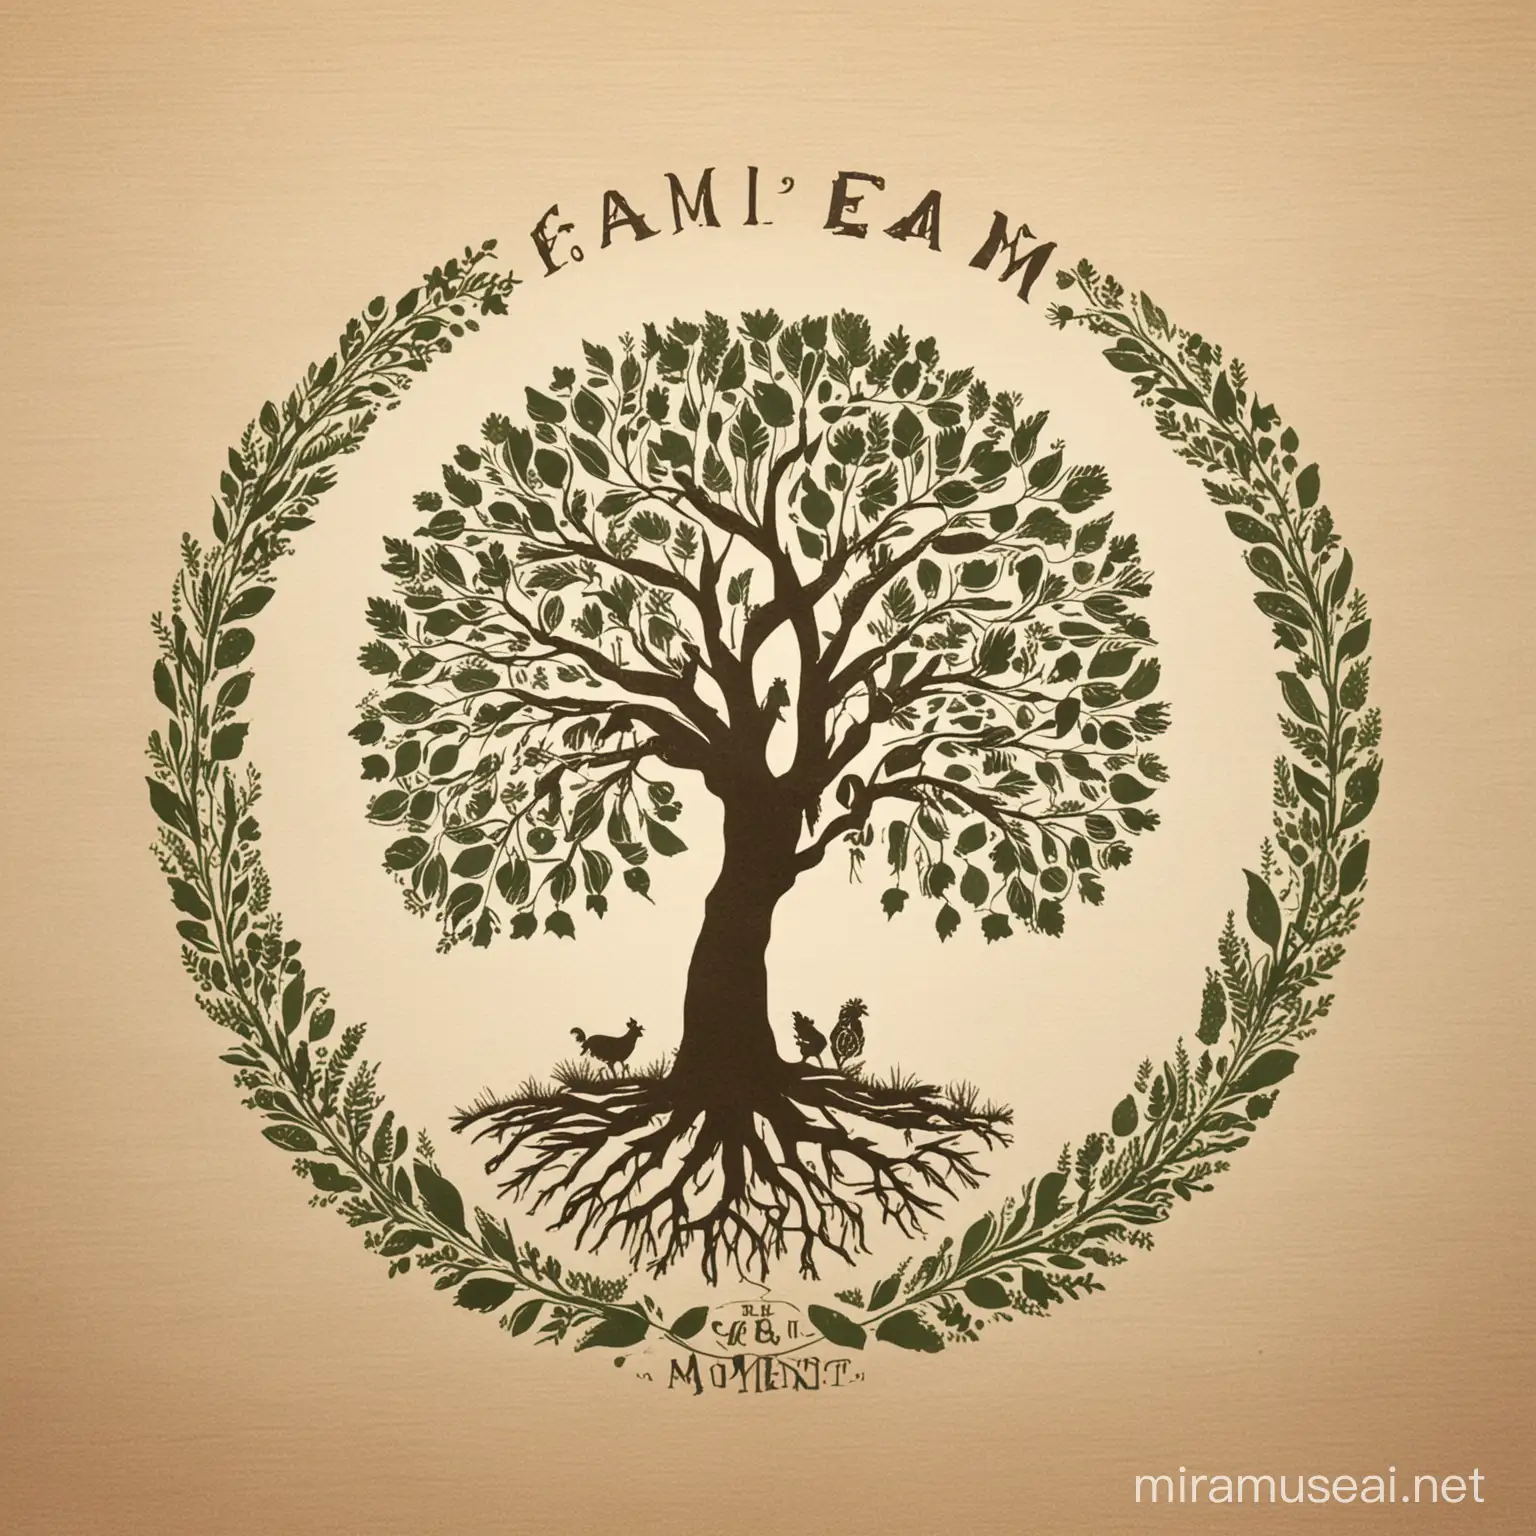 The logo is a harmonious blend of nature and education elements, symbolizing the core values of Hamilton Pool Farm School. At the center is a stylized, green tree that represents growth and connection to nature. Its roots are visibly intertwined with soil, hinting at the importance of understanding and nurturing the earth.

Surrounding the tree, a circular design incorporates silhouettes of a chicken and a cow on either side, representing the animal husbandry aspect of the school. The top of the circle is adorned with a gentle arc of leaves and vegetables, showcasing the farm's focus on gardening and sustainable agriculture.

Below the tree, two crossed tools, a gardening hoe and a shepherd's crook, signify the practical skills taught at the farm. The entire design is encircled by a ring, suggesting unity and the cyclical nature of life and learning.

The farm school's name, "Hamilton Pool Farm School," is elegantly written in a clear, serif font, encircling the logo to complete the design. The overall feel is organic and welcoming, inviting viewers to explore the world of farm-based learning.  With a farm school house in the distance.
